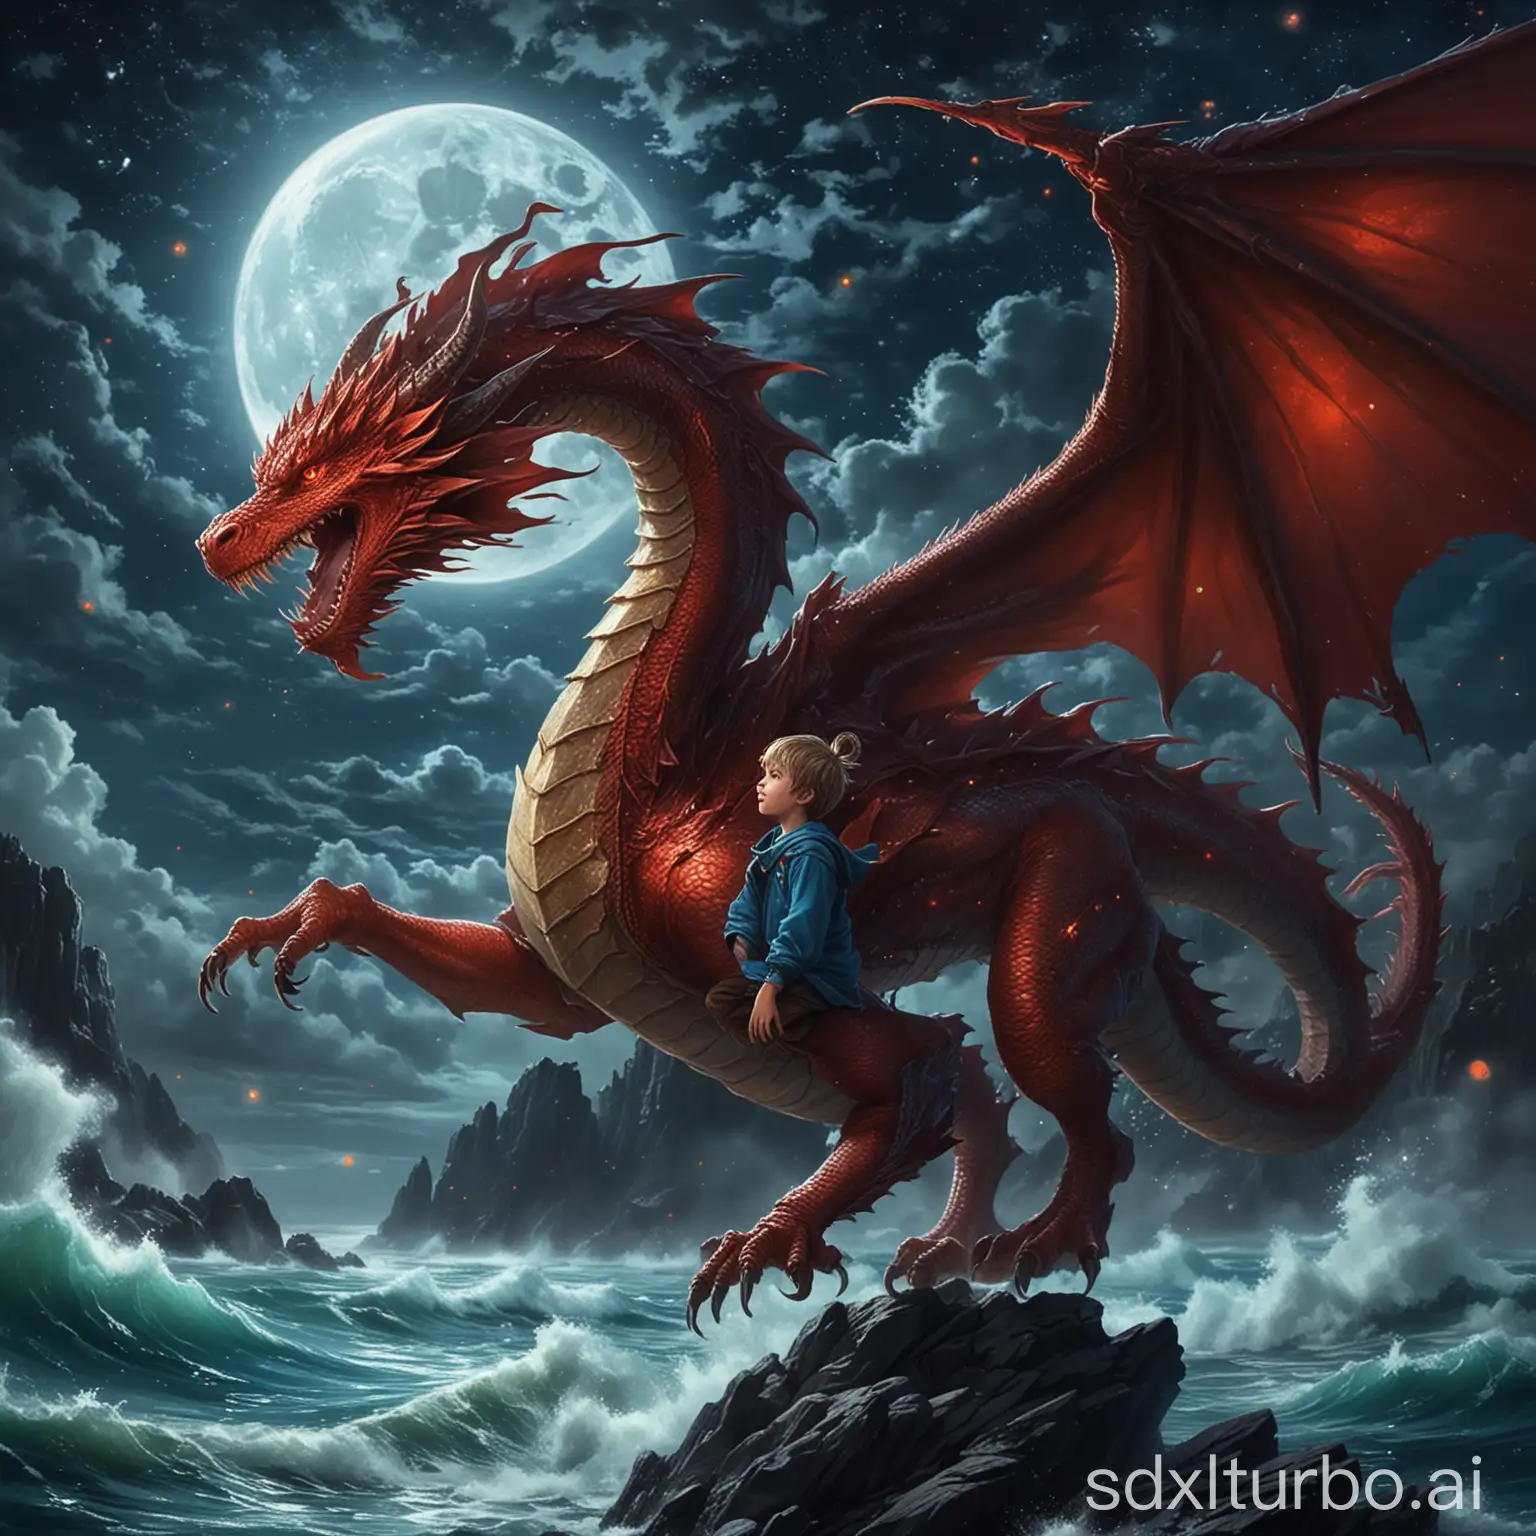 A 6-year-old boy flies through the night on an impressive dragon over the sea. n **Dragon:** - Body: Glowing red. - Back: Covered in sharp spines. - Head: Two large, majestic horns. - Wings: Large, transparent and shimmering in various shades of blue. n **Boy:** - Hair: Blond. - Face: Joyful, adventurous expression. - Clothing: Blue sweater, red jacket. - Posture: Sits securely on the back of the dragon and holds onto a horn or some kind of reins. n **Background:** - Sky: Dark with twinkling stars. - Moon: Large and bright, gently illuminating the scene. - Sea: Wide and dark blue, glittering in the moonlight. n **Colors and mood:** - Contrasting colors: Warm red tones for the dragon, cool blue tones for the sky and the sea. - Dynamic and exciting atmosphere: Movement in the wings of the dragon and the waves of the sea. - The boy's expression: Adventurous spirit and joy. n **Composition:** - The dragon flies majestically through the middle of the picture, slightly tilted forward. - The boy sits upright on the back of the dragon with a big smile. - The moon in the background is large enough to illuminate the scene but not so large that it distracts from the dragon and the boy.